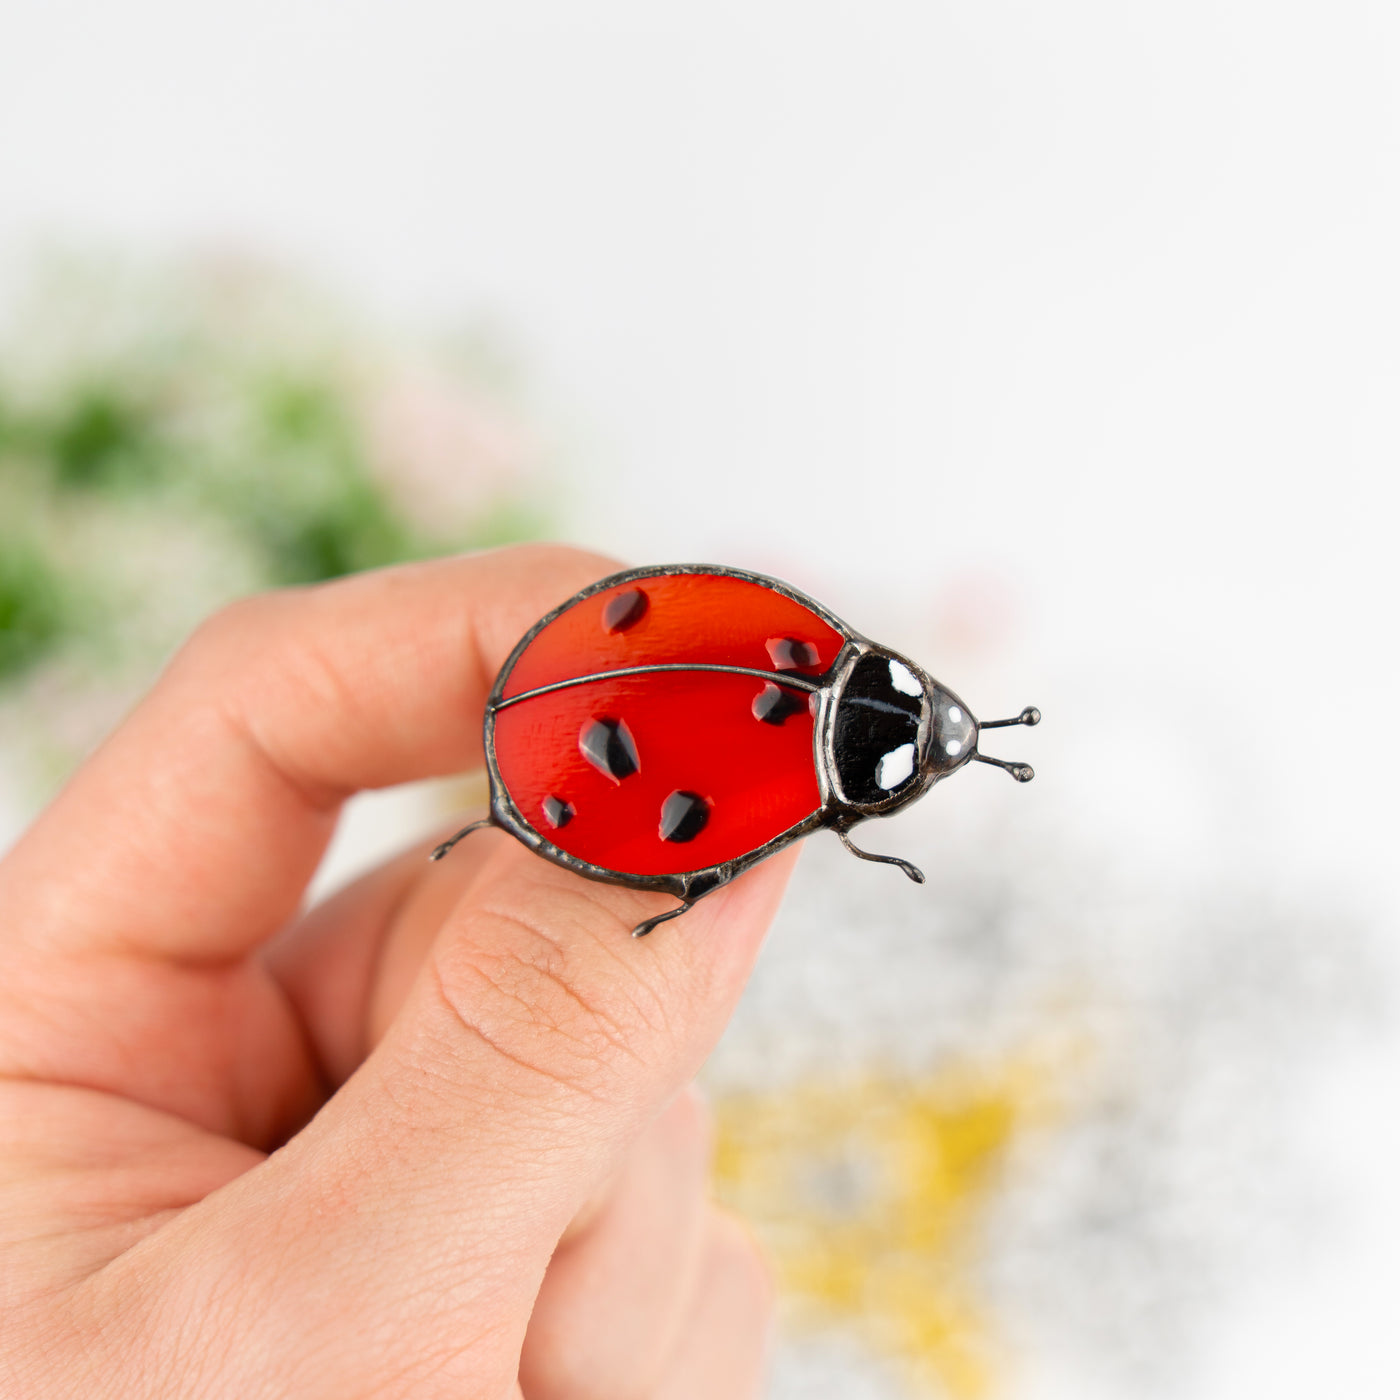 Stained glass brooch of a ladybug for women 